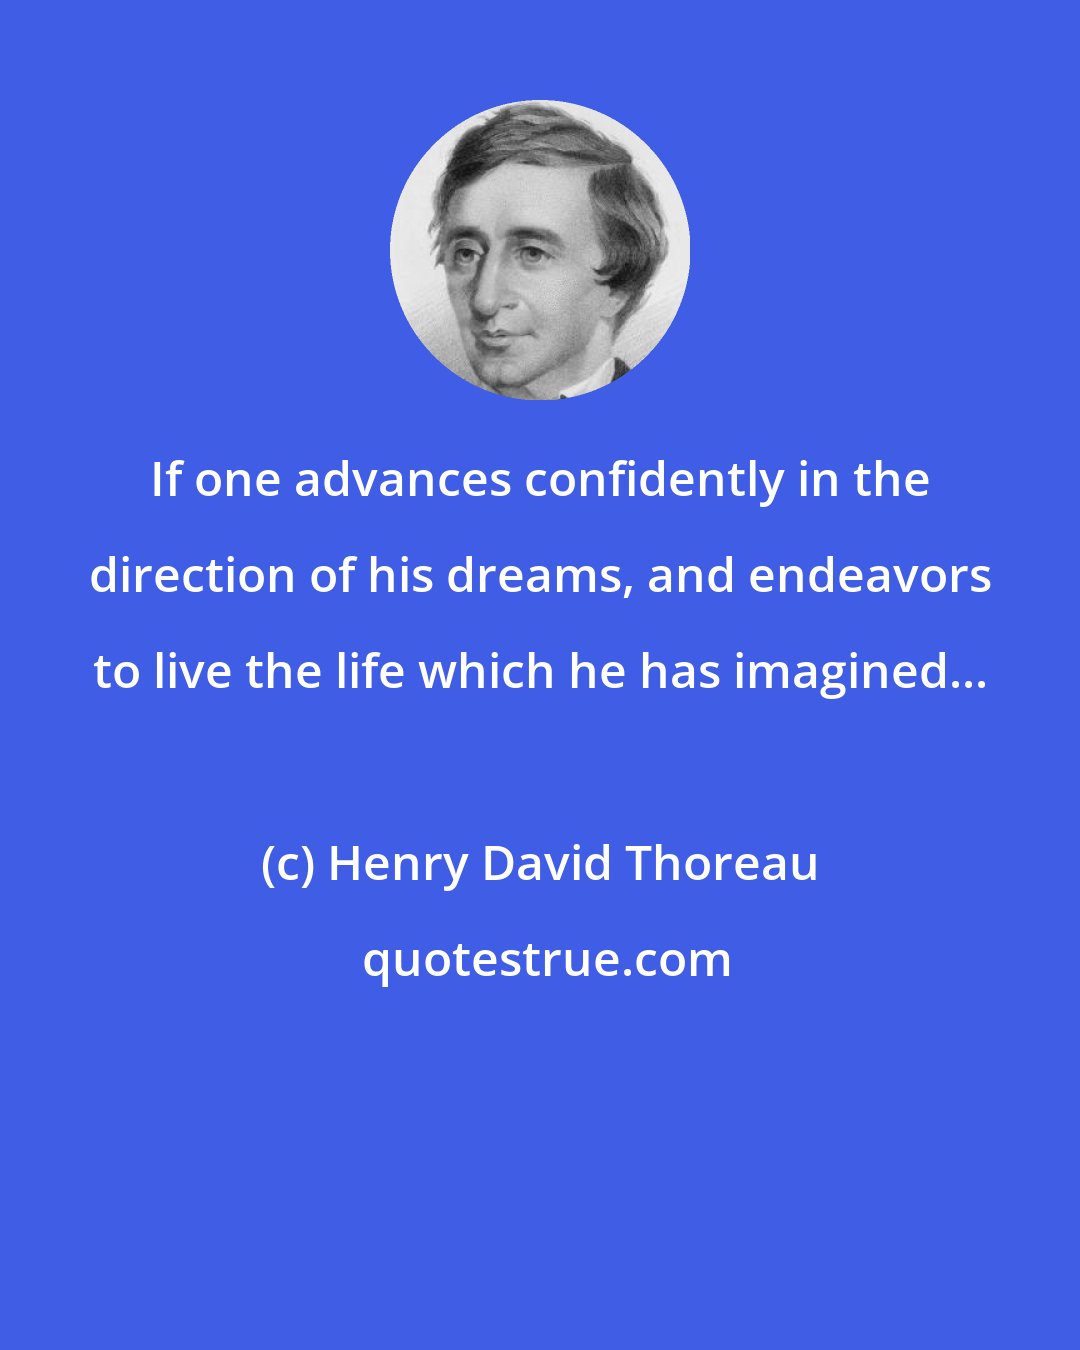 Henry David Thoreau: If one advances confidently in the direction of his dreams, and endeavors to live the life which he has imagined...